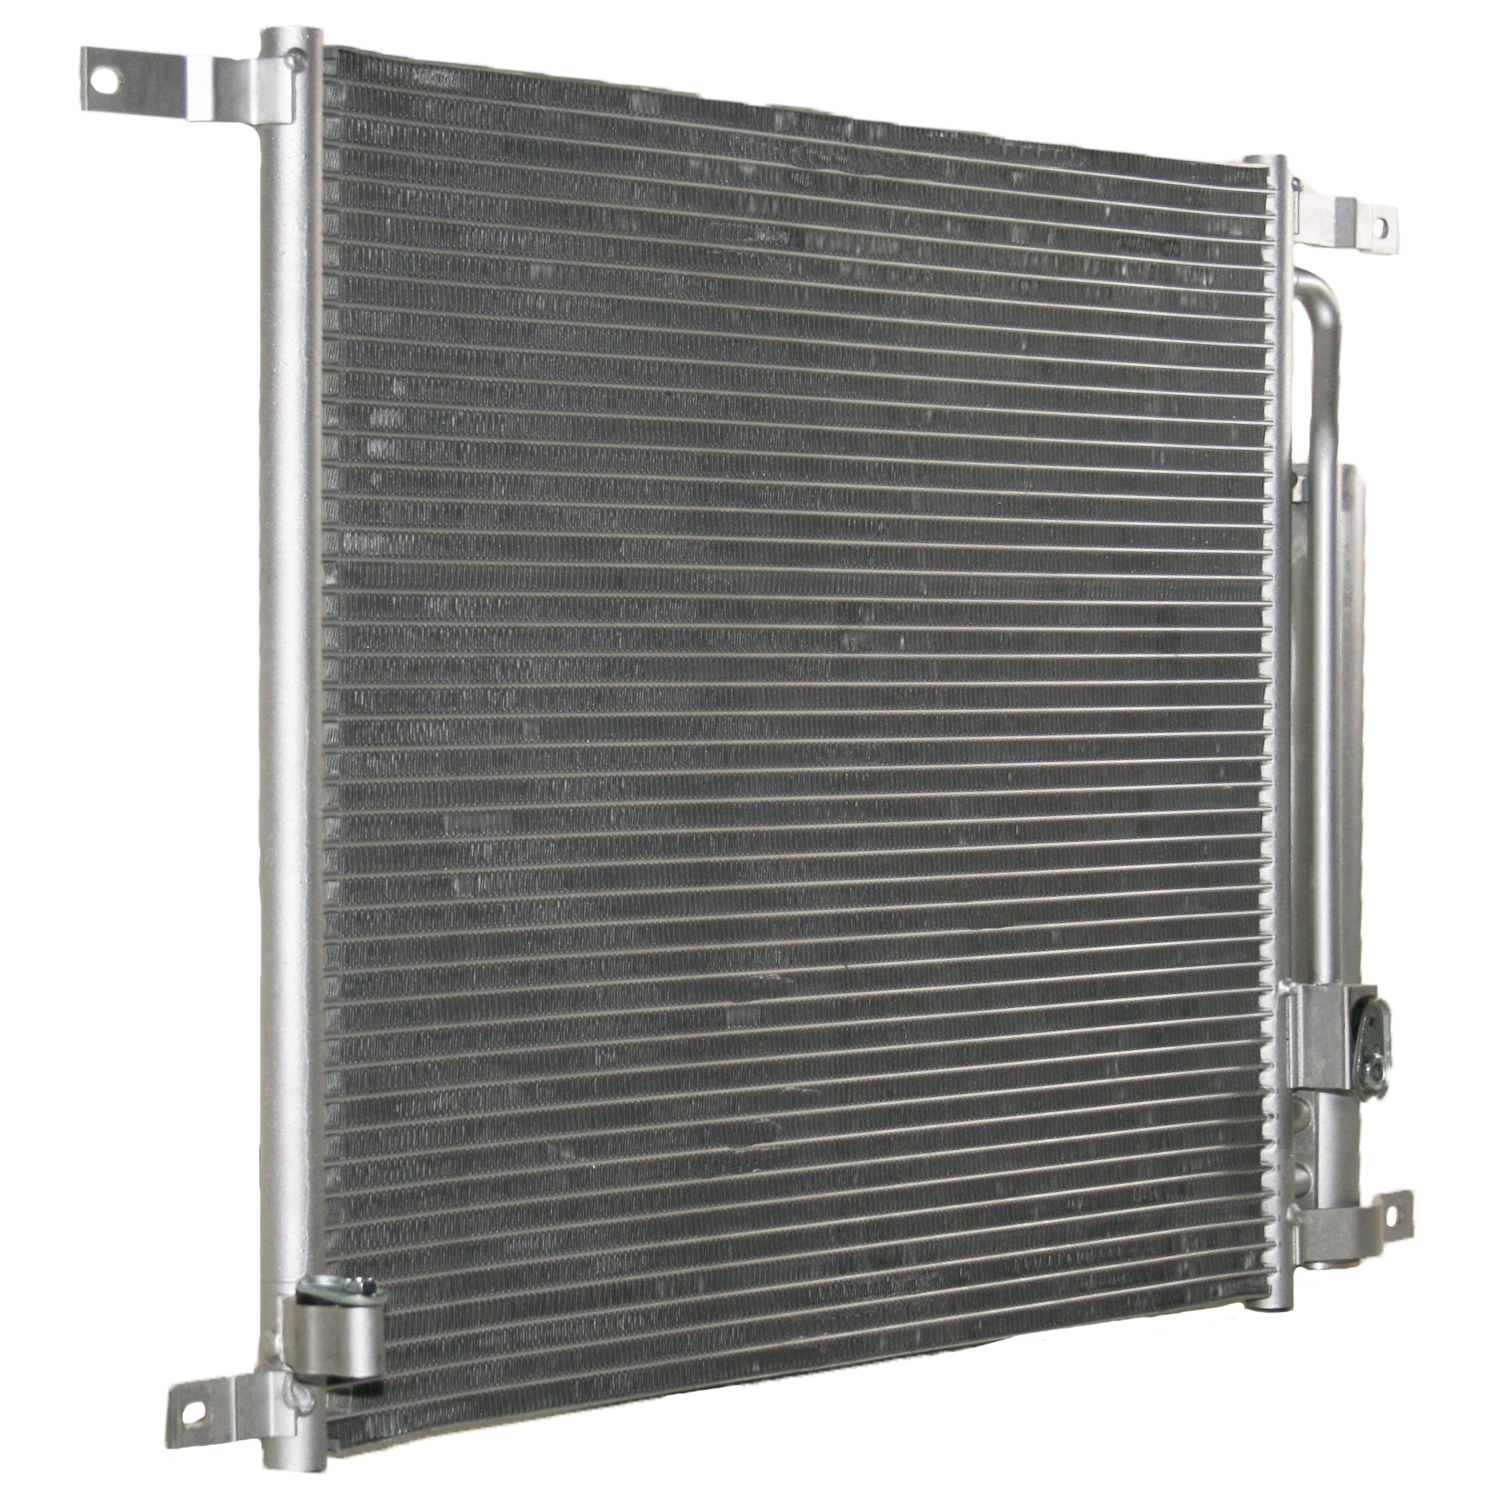 TCW Condenser 44-5029 New Product Image field_60b6a13a6e67c